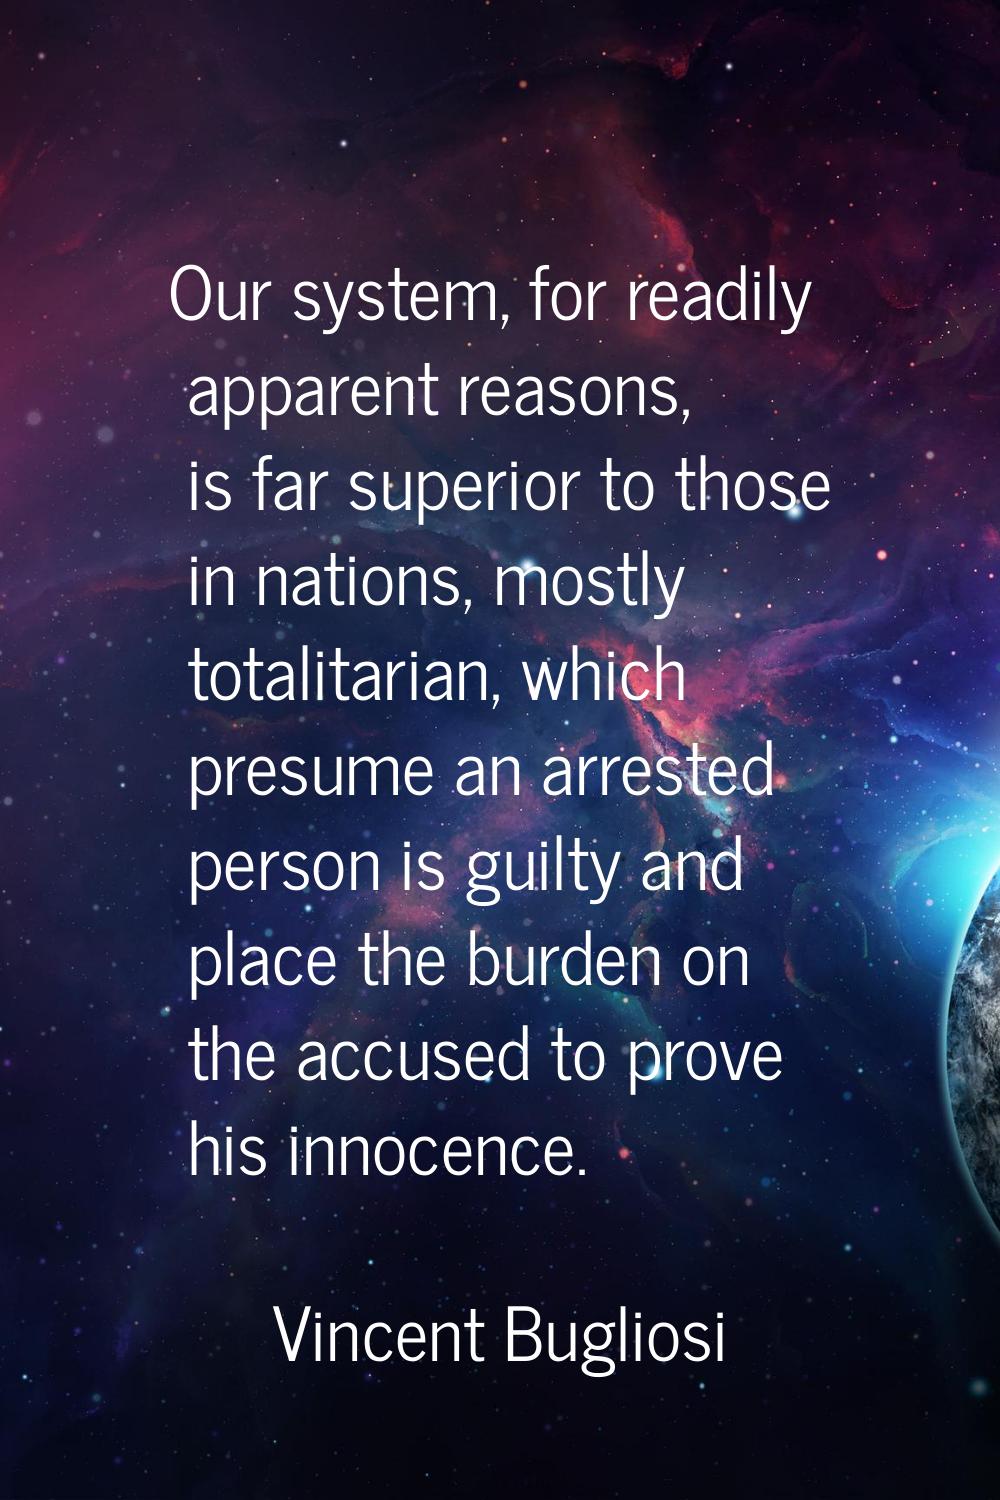 Our system, for readily apparent reasons, is far superior to those in nations, mostly totalitarian,